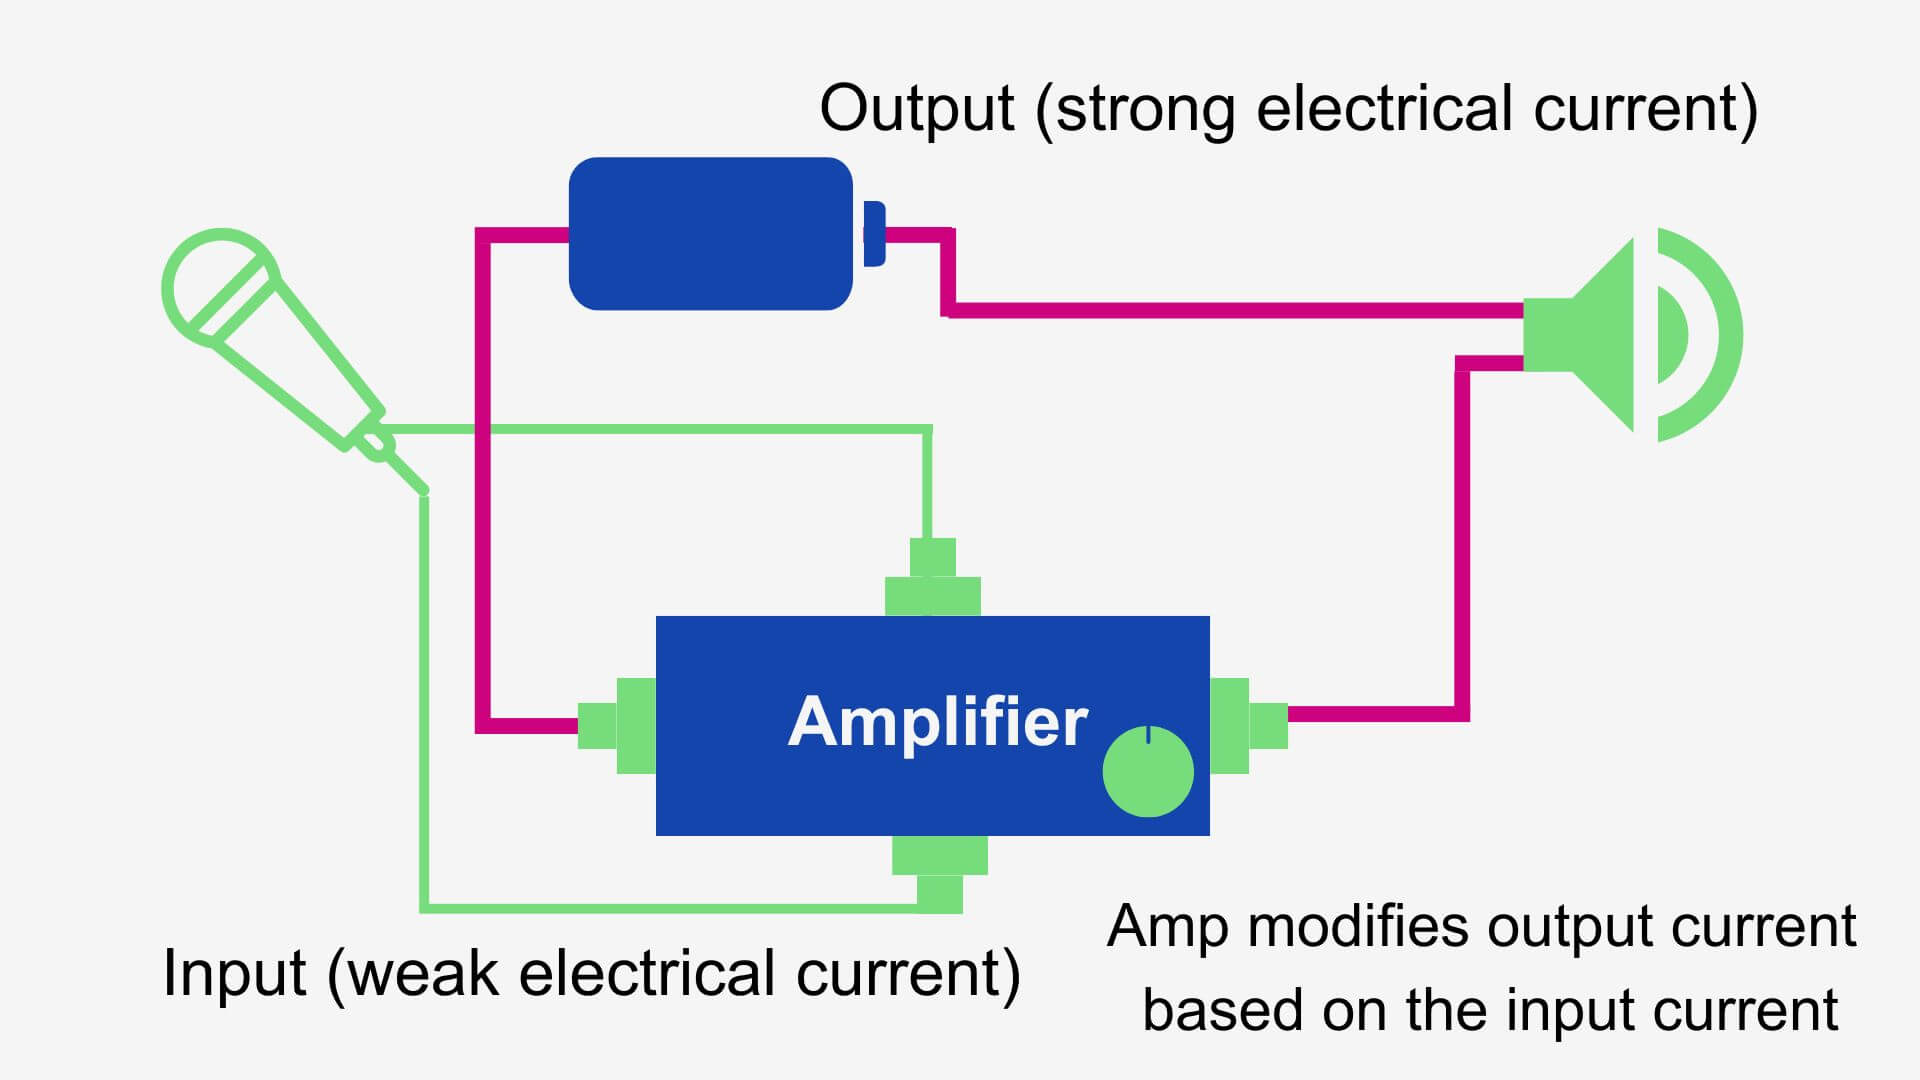 An amplifier creates a duplicate copy of an input signal, and modifies the duplicate based on fluctuations in the weaker input signal.   

Both battery-powered and amplifiers connected to mains electricity smoothen out the electrical signal to ensure it’s even, and without doing so the sound reproduction of the signal would be inaccurate. 